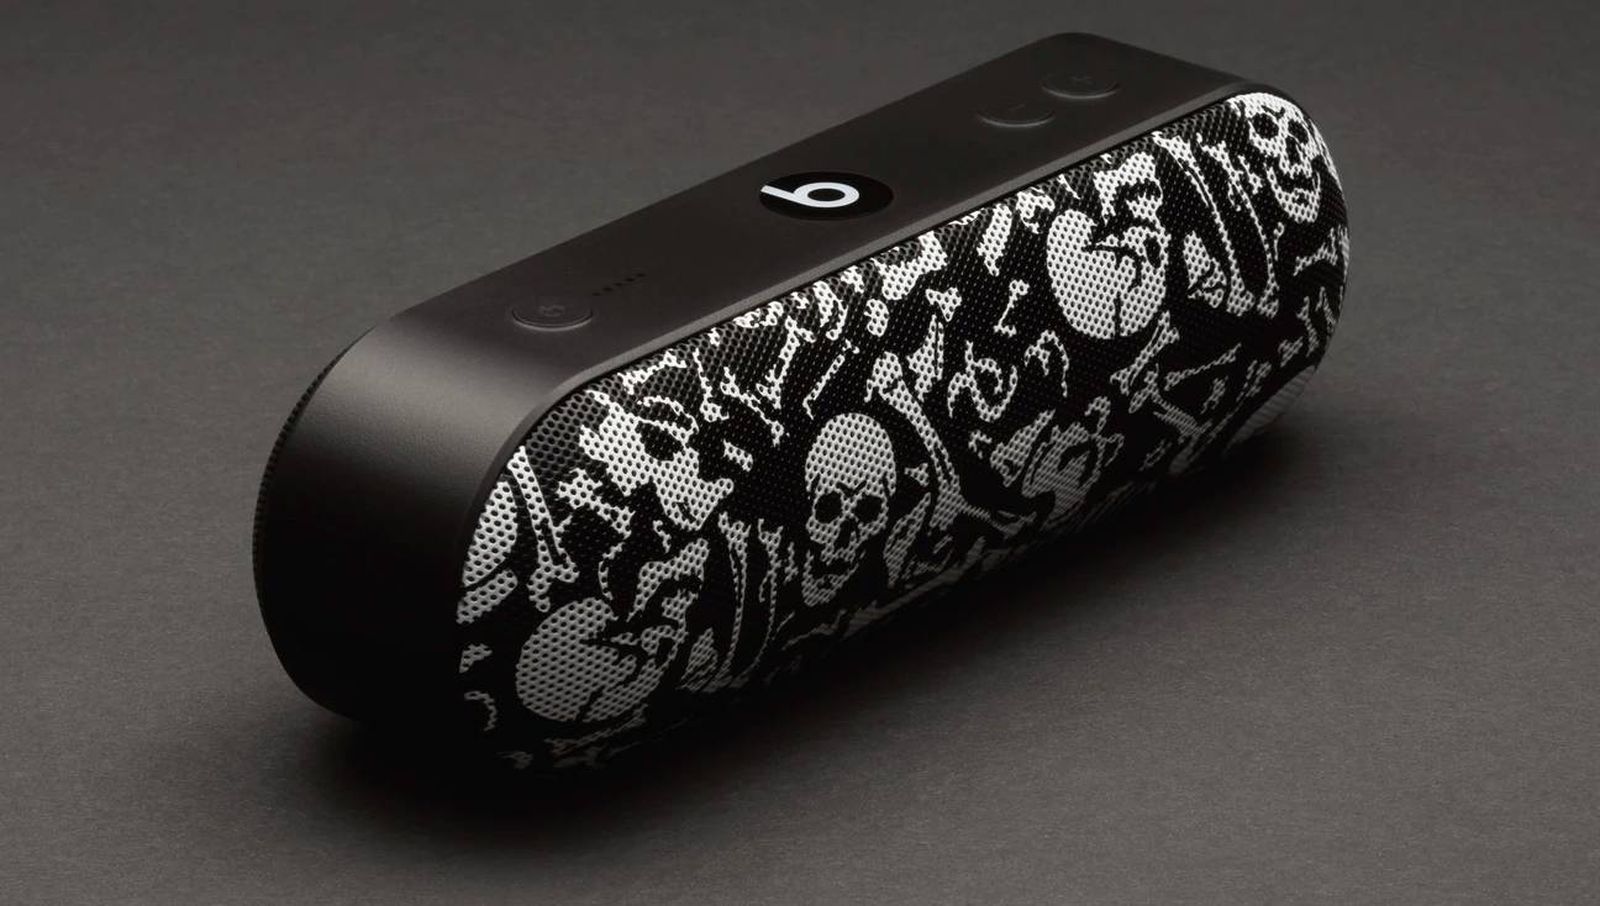 Apple's Discontinued Beats Pill+ Speaker Returning With Limited 